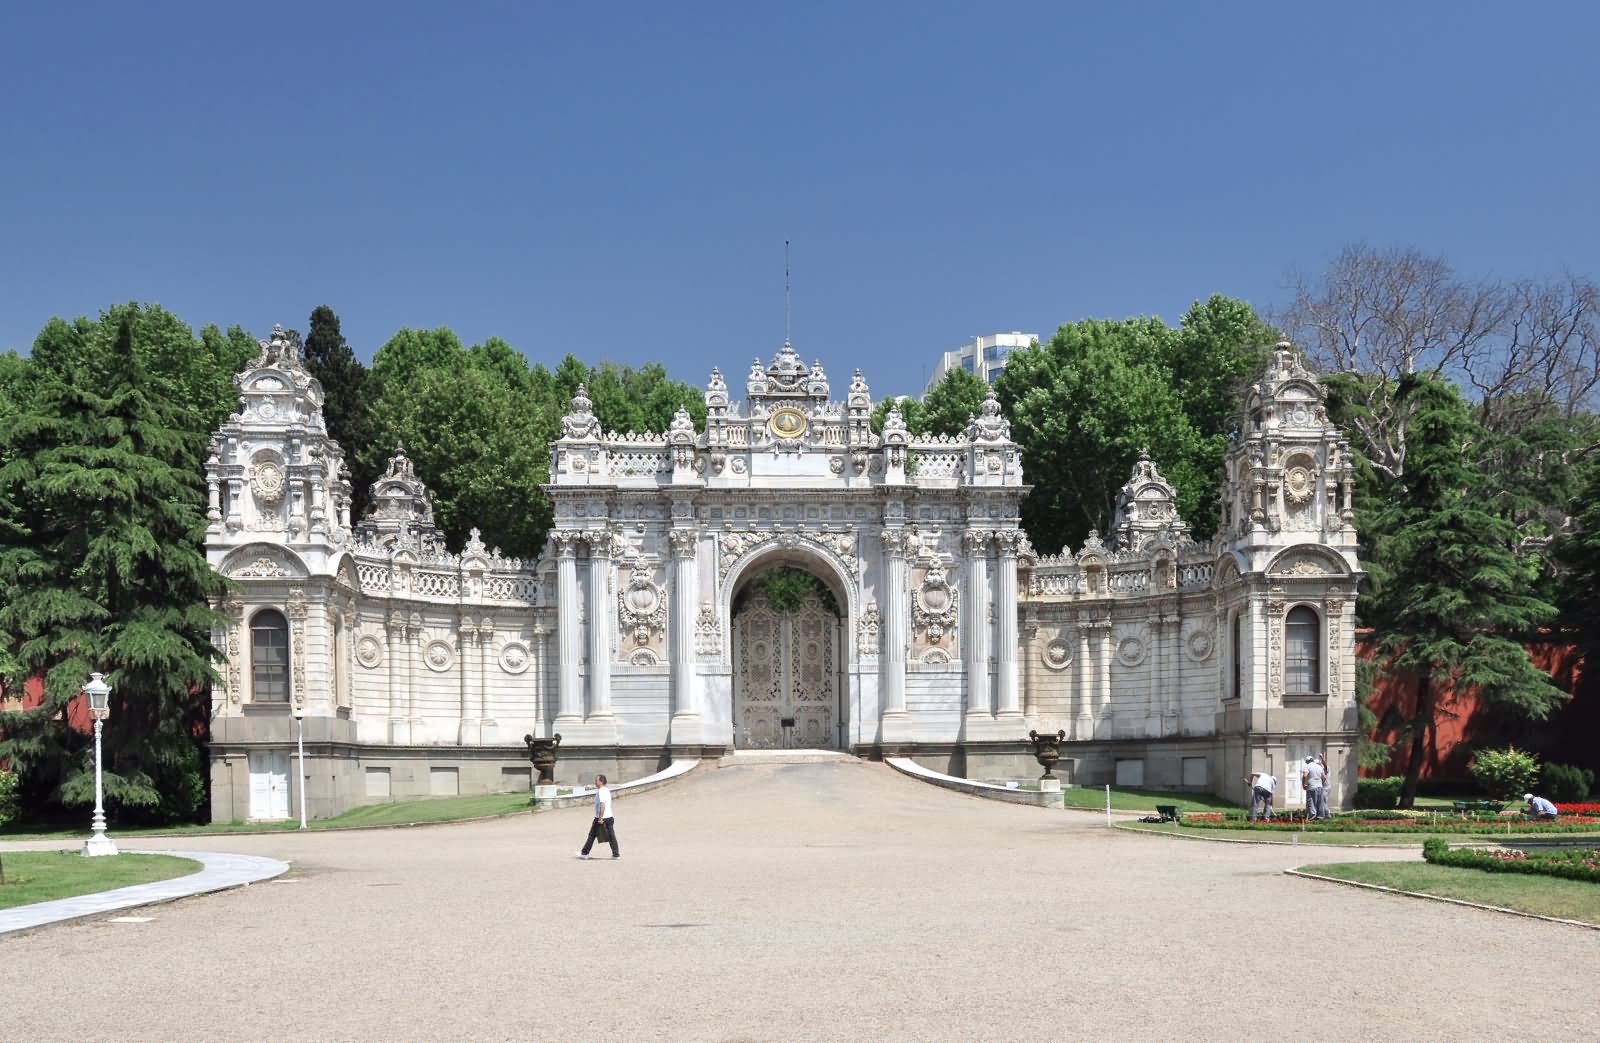 Treasury Gate Of The Dolmabahce Palace, Istanbul